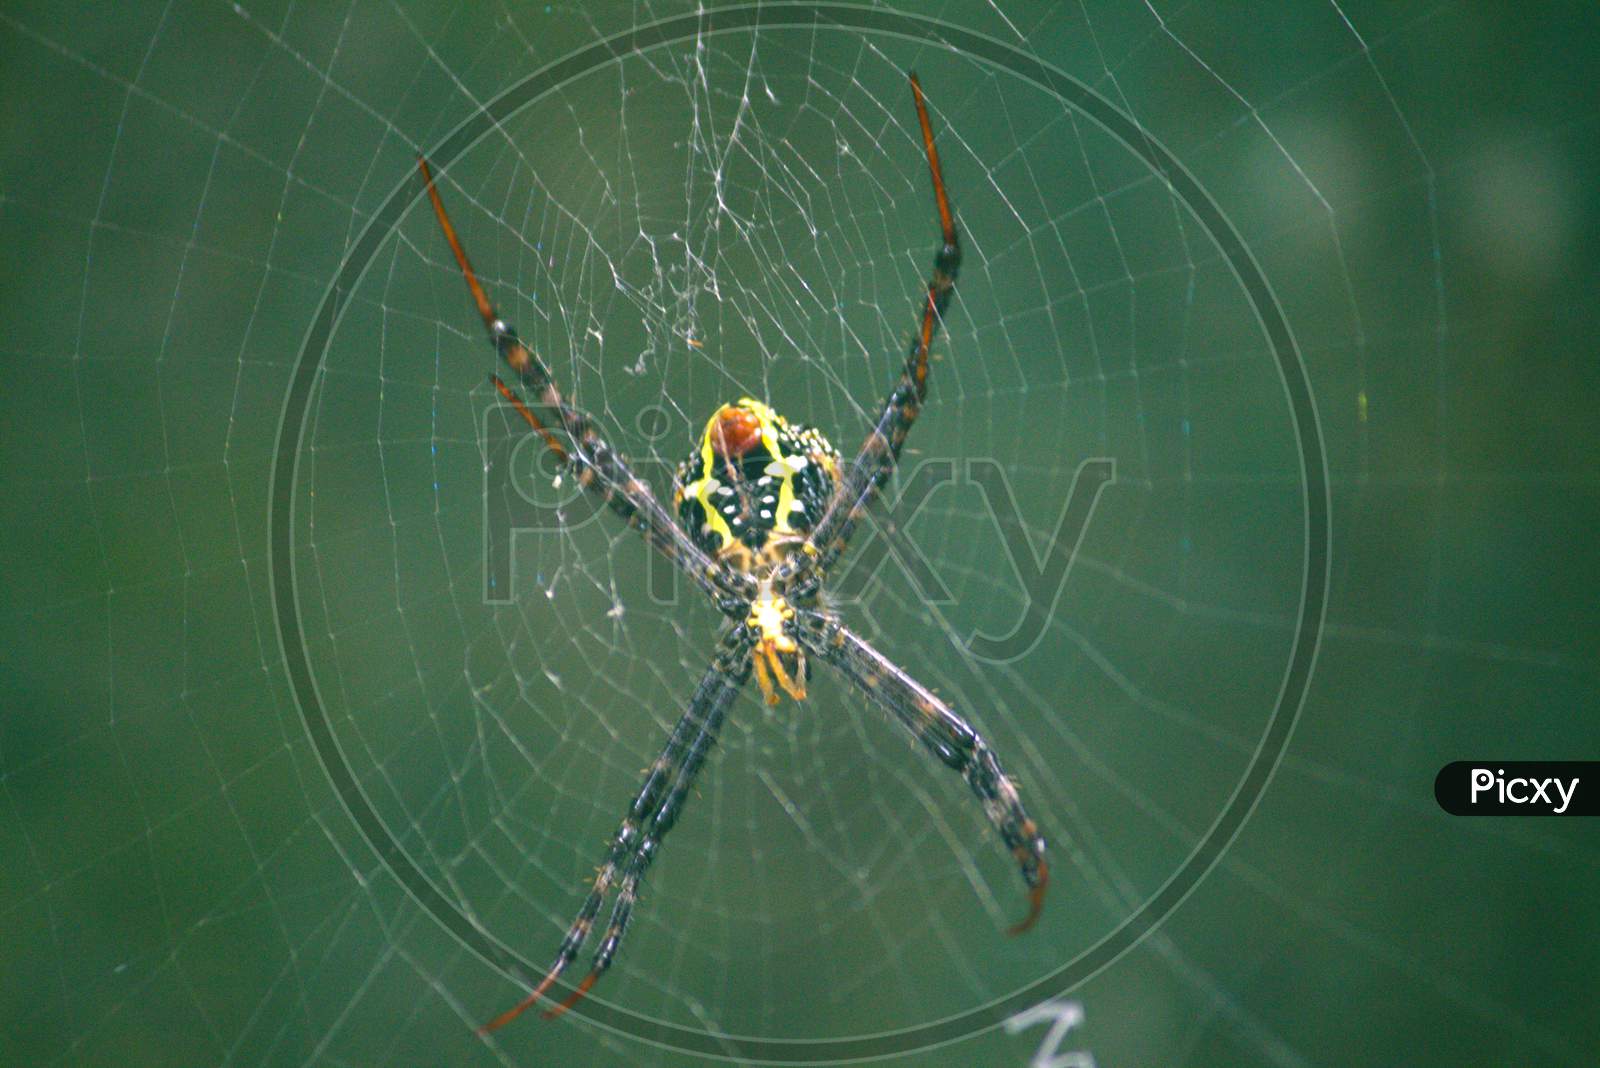 Spider in the Web